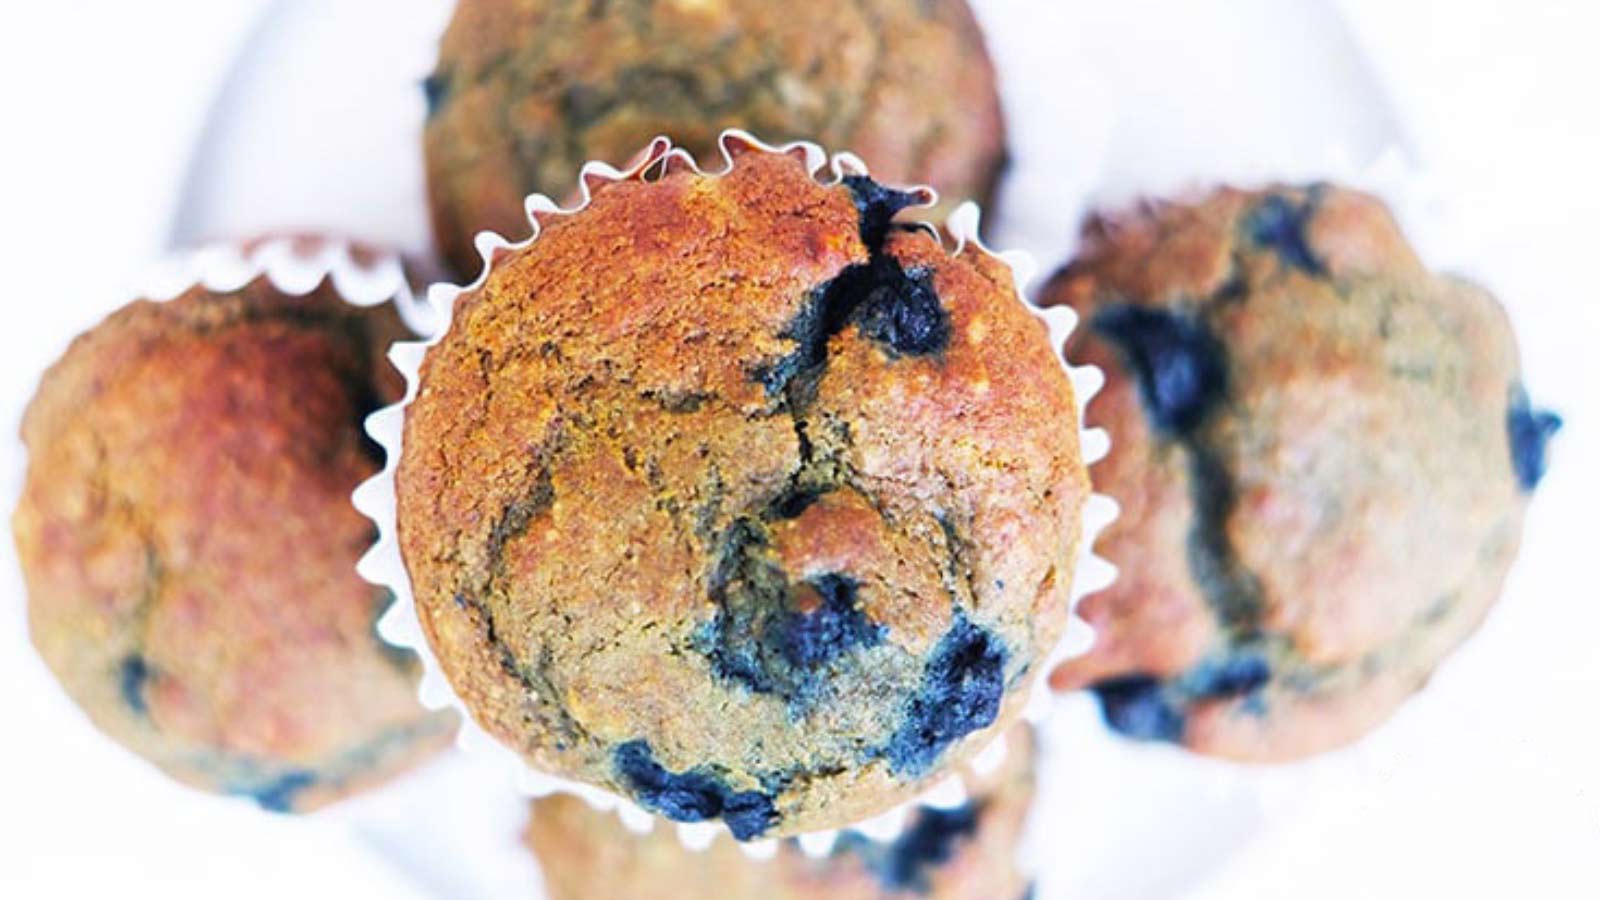 <p>These <a href="https://www.thegraciouspantry.com/clean-eating-blueberry-corn-muffins/">blueberry corn muffins</a> make a wonderful, sweet snack This was actually one of Elvis’ favorite snacks, and this remake would make him proud. These whole-grain muffins are the perfect snack for getting rid of the “hangries” and keeping them at bay until dinner. They freeze really well, so you can make a double batch and freeze them for future snacks. These are also wonderfully portable for after-school or after-work activities.</p>